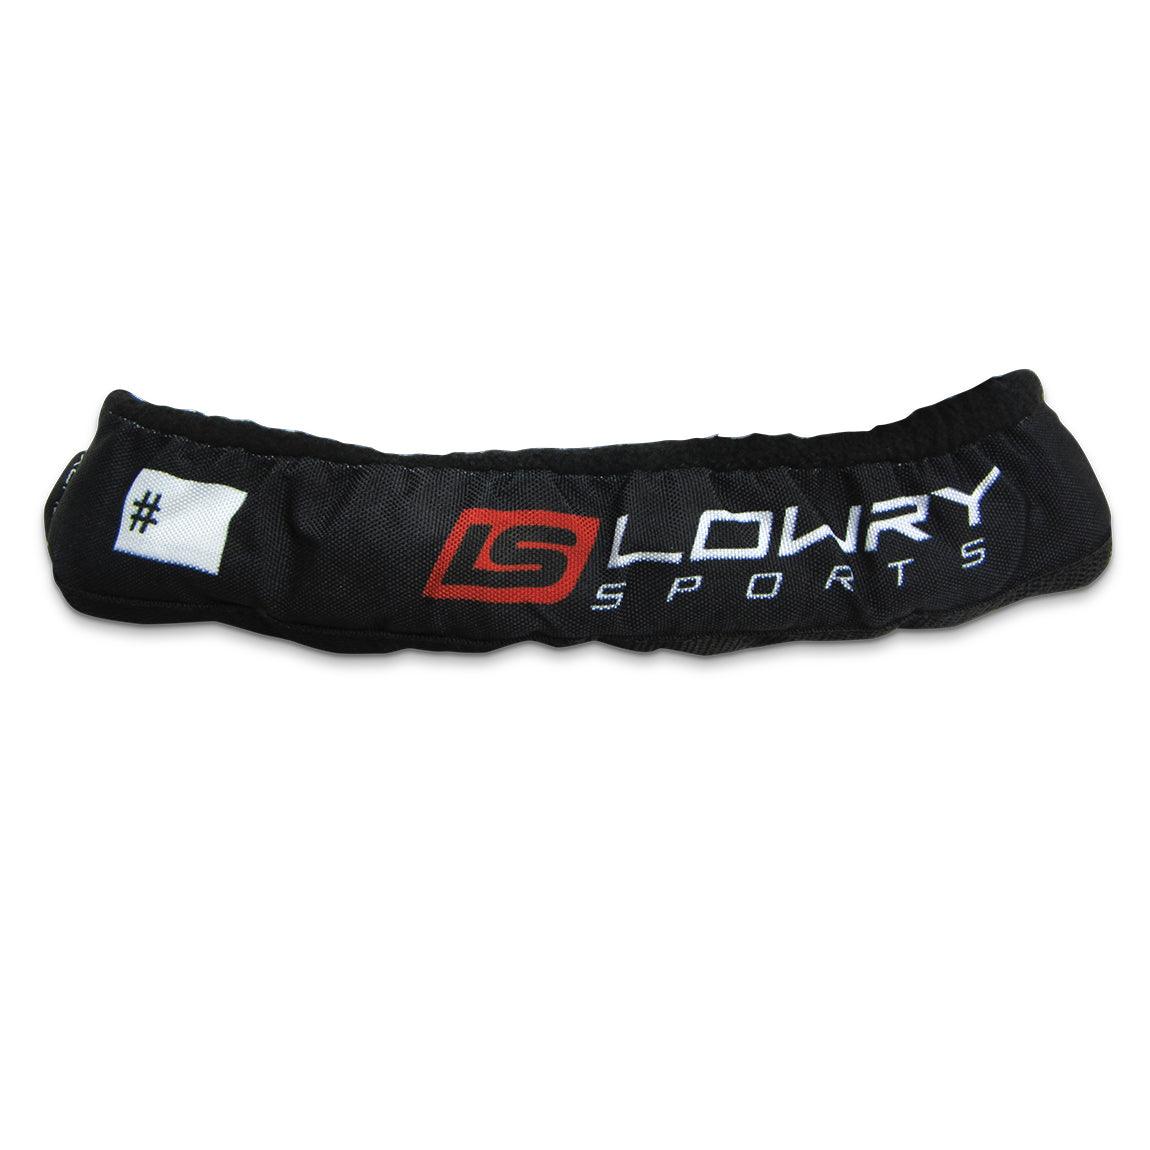 Premium Low Profile Blade Protector - Sports Excellence